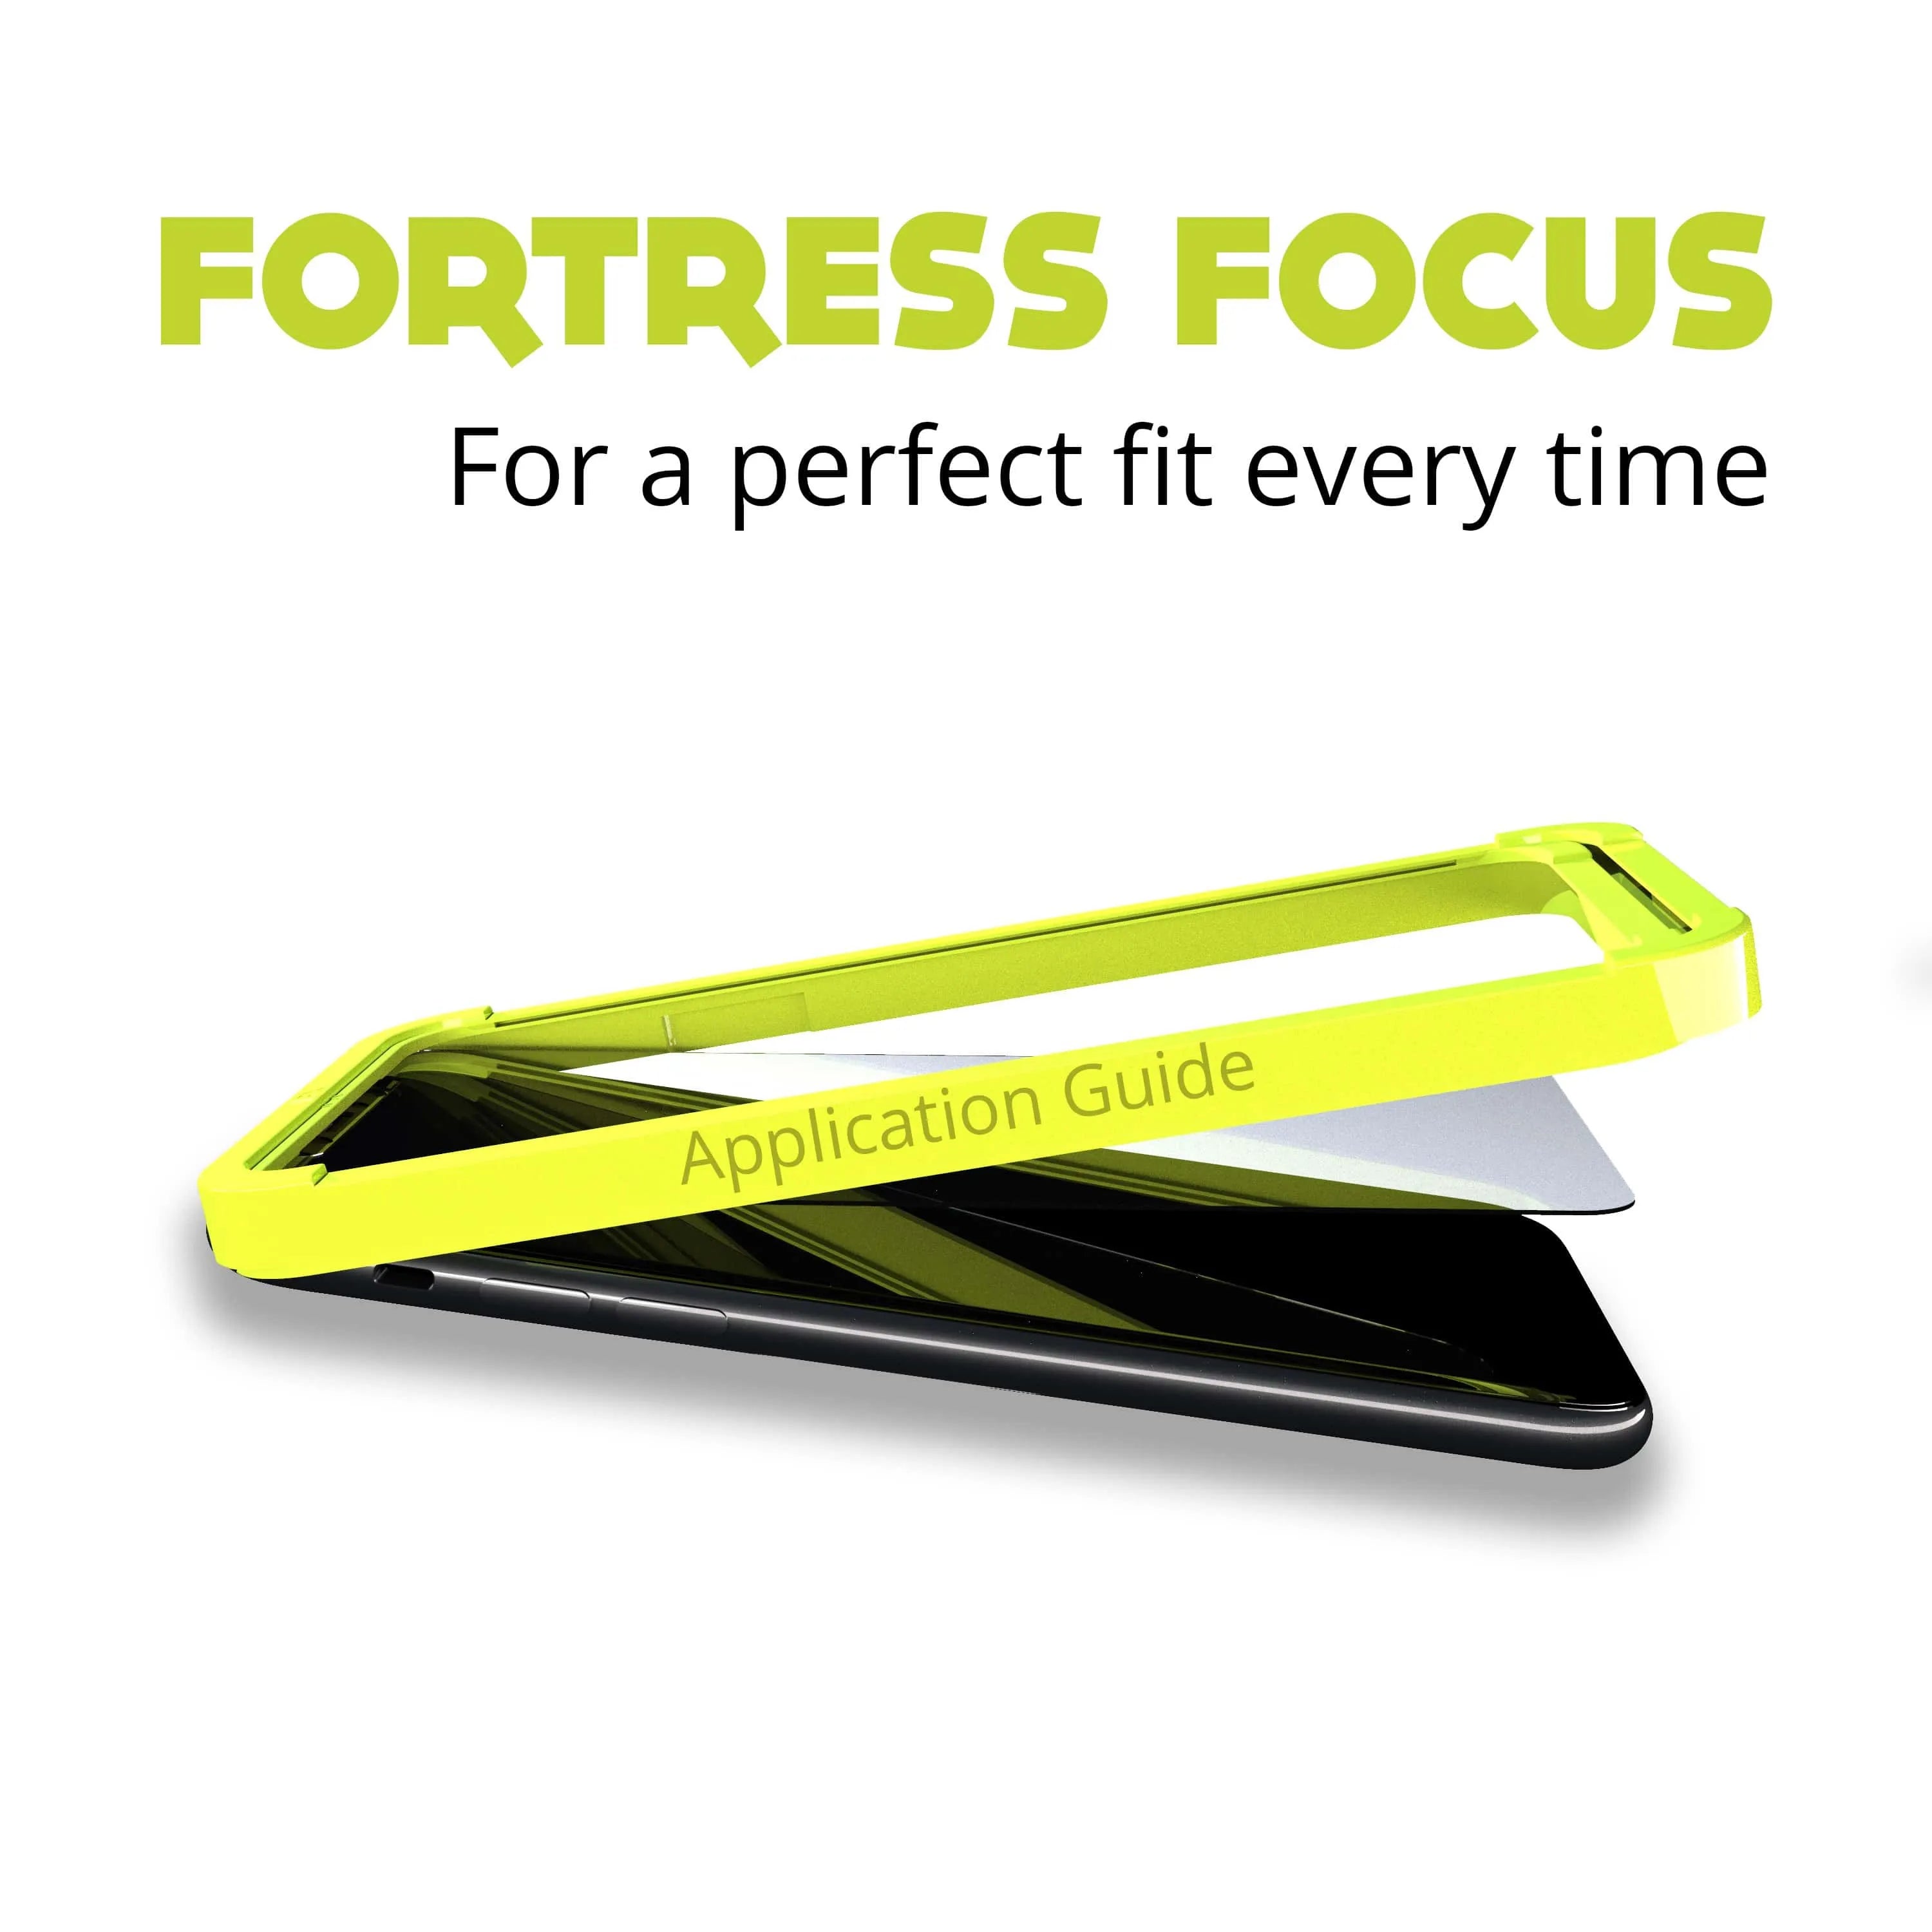 Fortress iPhone 12 Pro Max Screen Protector - $200 Device Coverage  Scooch Screen Protector